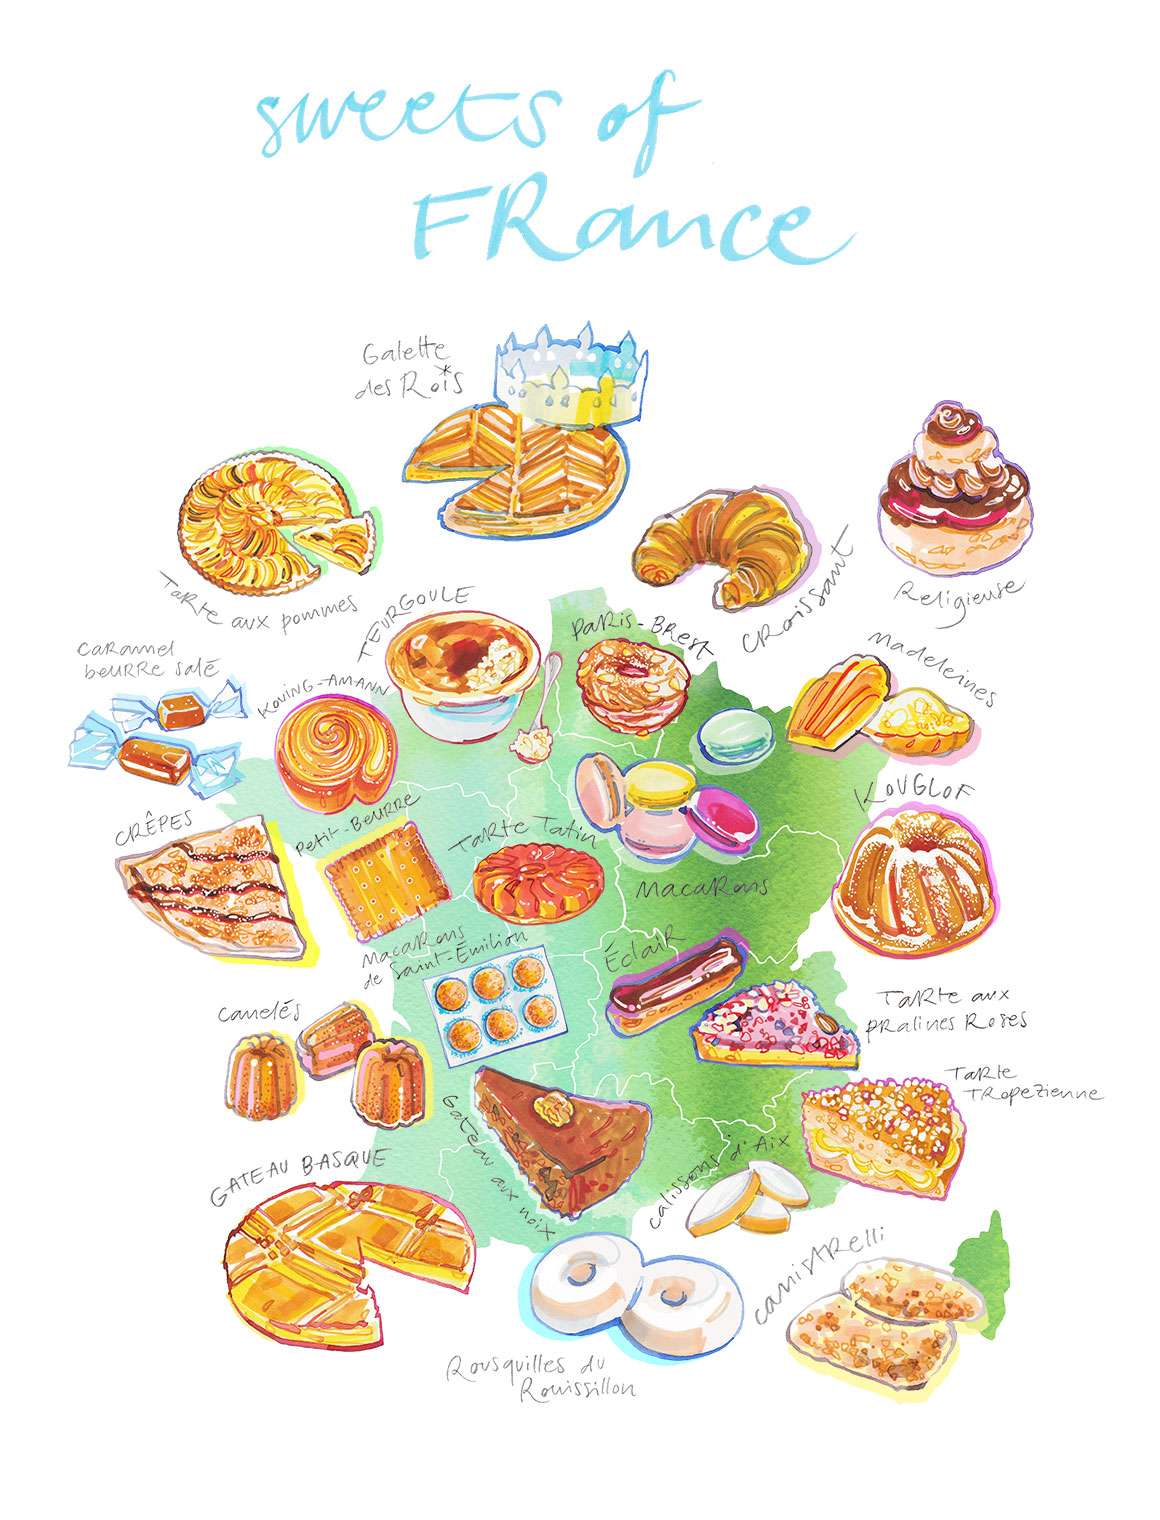 illustrated Map of Sweets and Pastries of France region by region